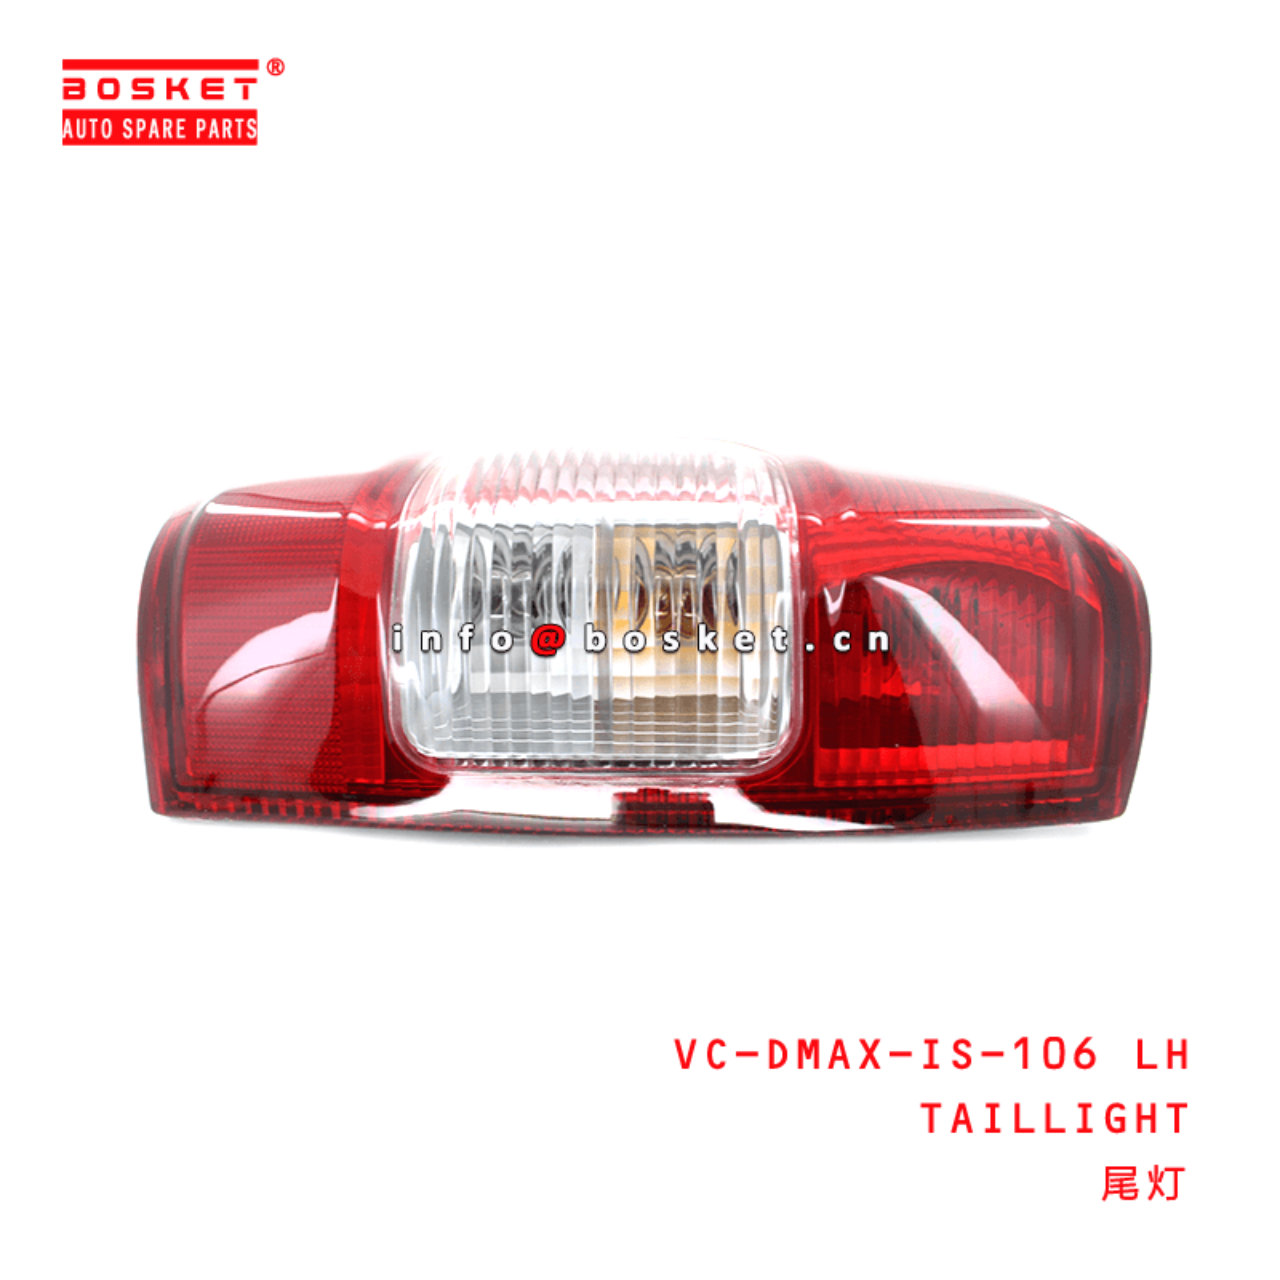 VC-DMAX-IS-106 LH Taillight Suitable for ISUZU D-MAX 02-05 06-08